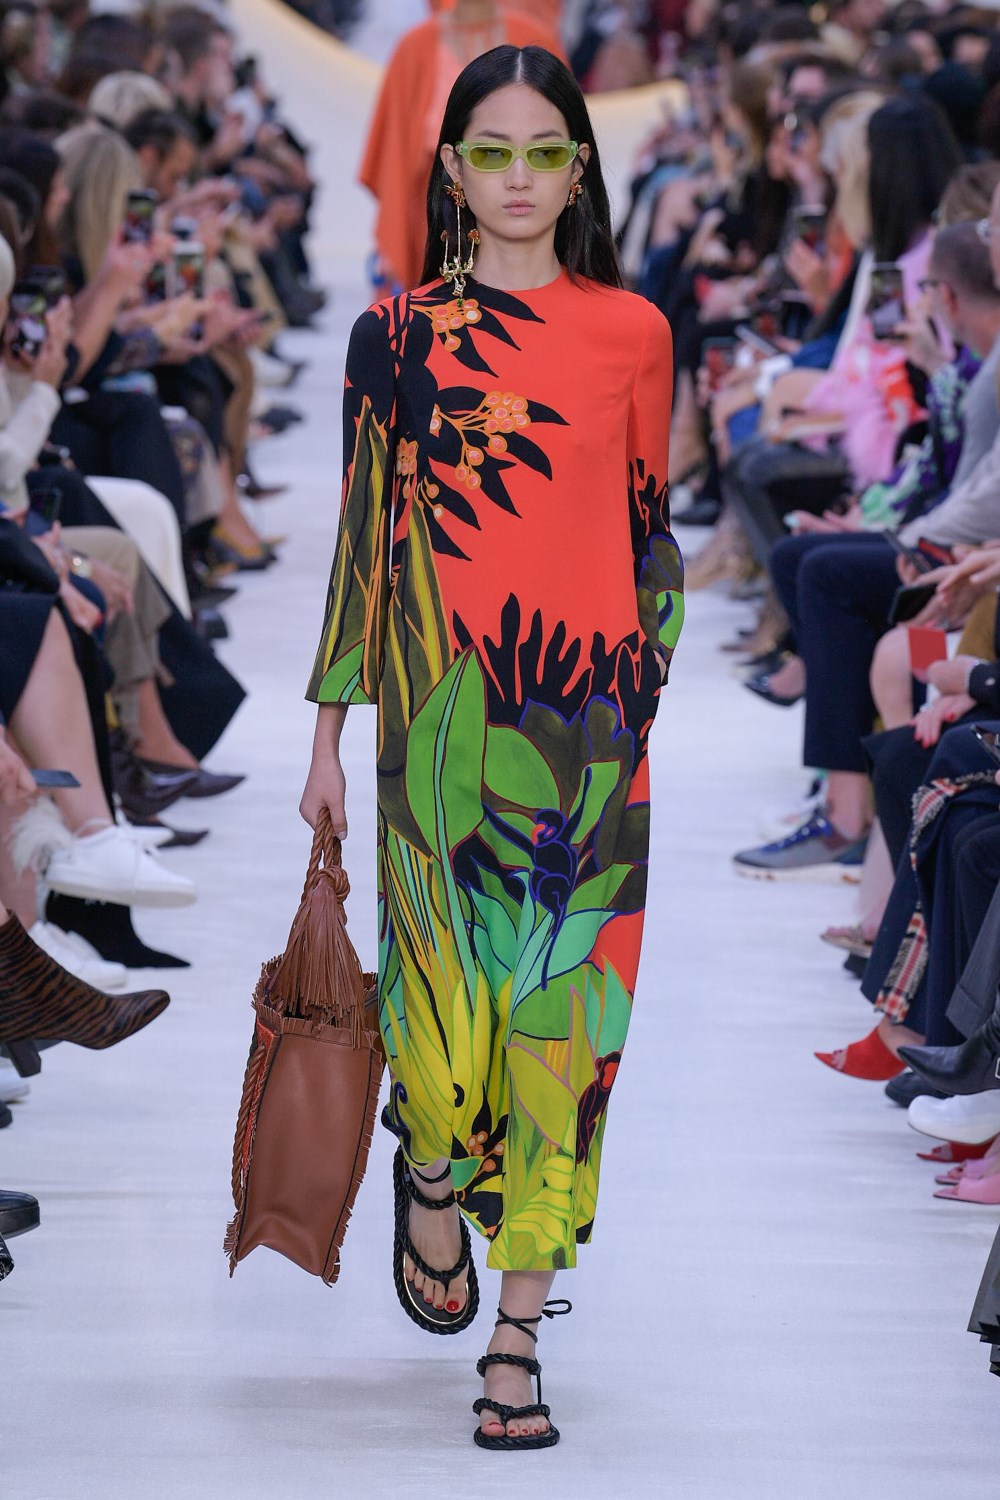 The Top 10 Most-Viewed Collections of Spring 2020 | The Impression